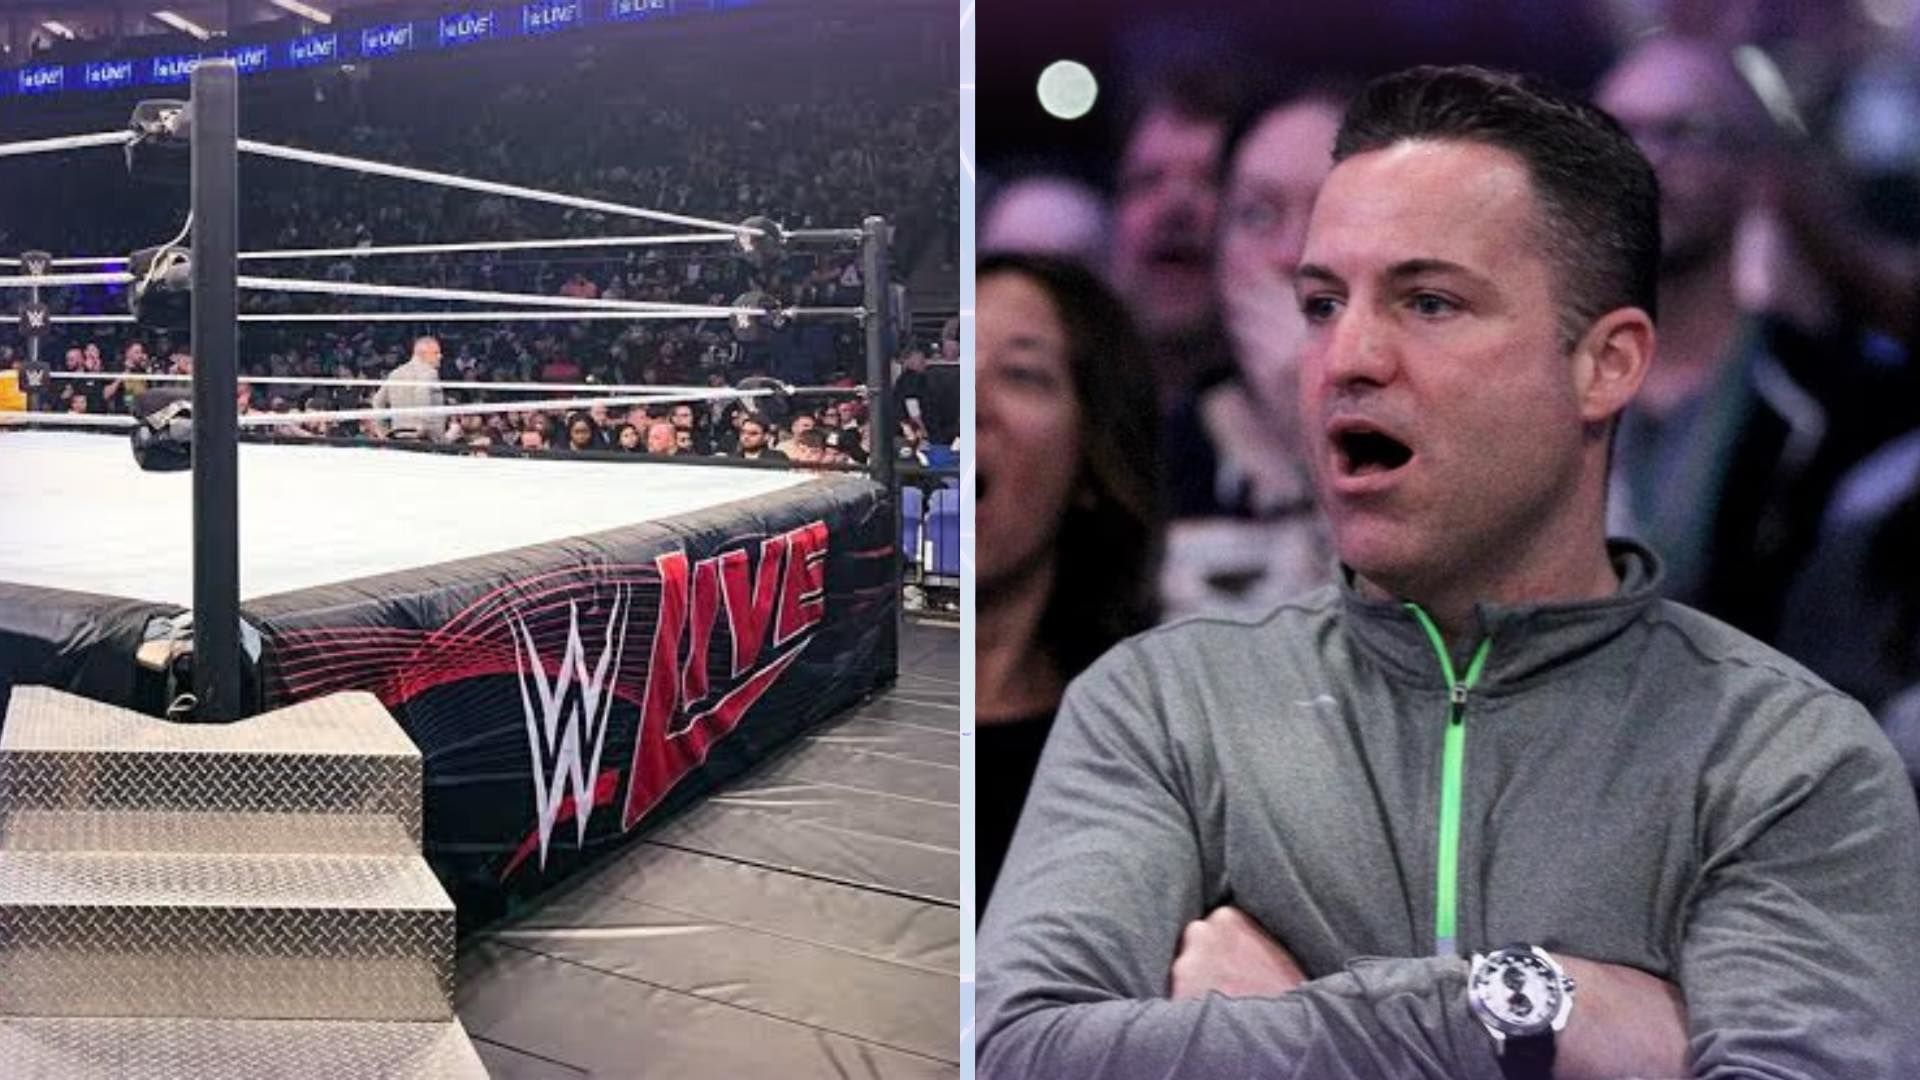 WWE fans were left stunned by the comments